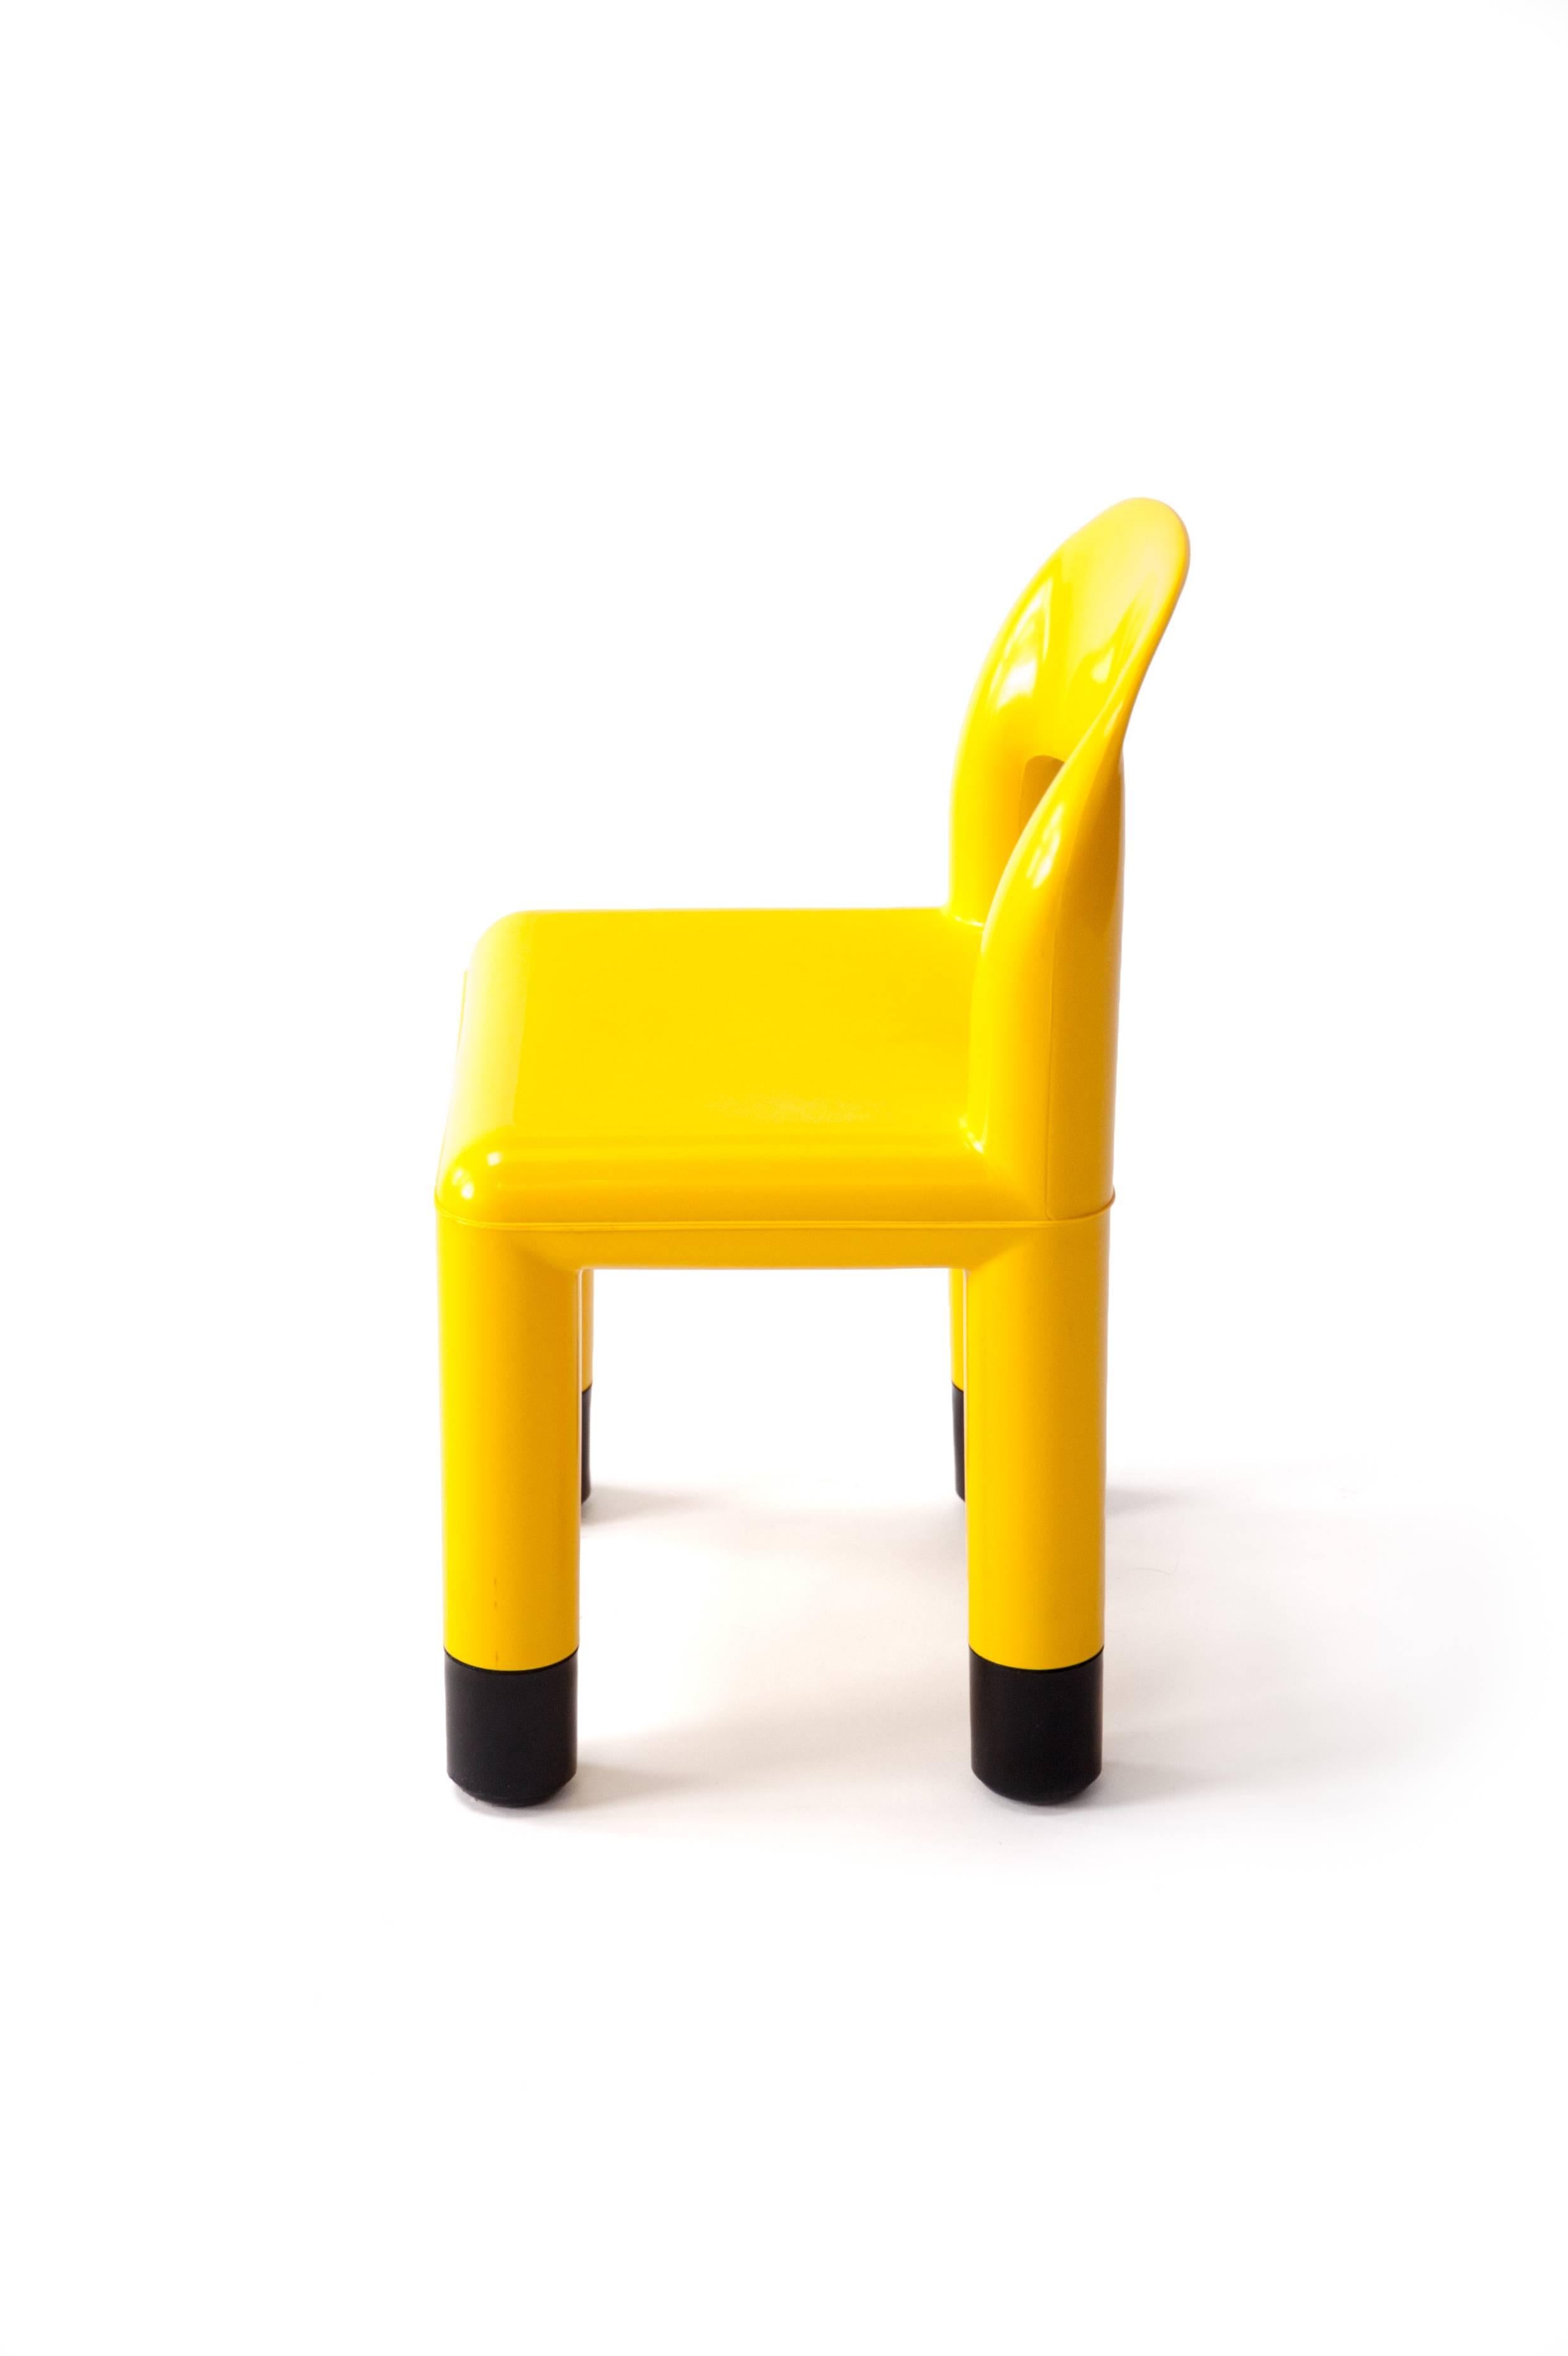 Yellow plastic child chair, vintage, Italy, 1980s

Vintage, Italy, 1980s
Yellow molded plastic with black plastic leg caps
Marked 